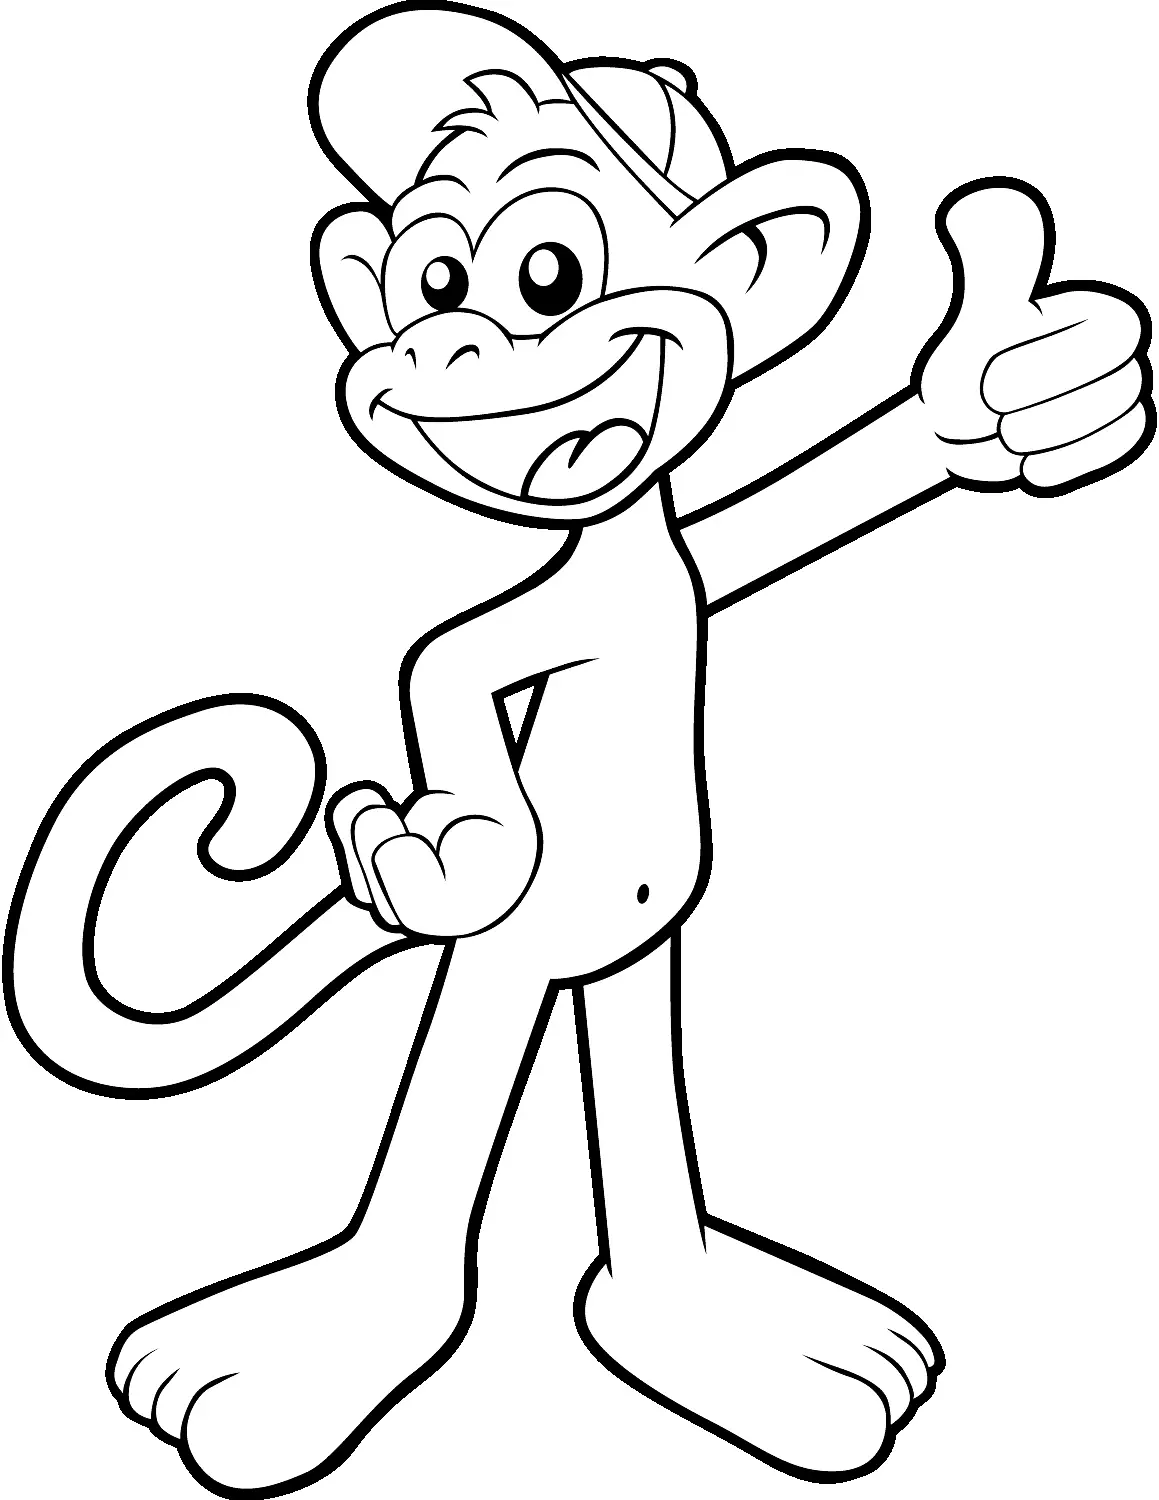 cute-cartoon-monkey-coloring-page